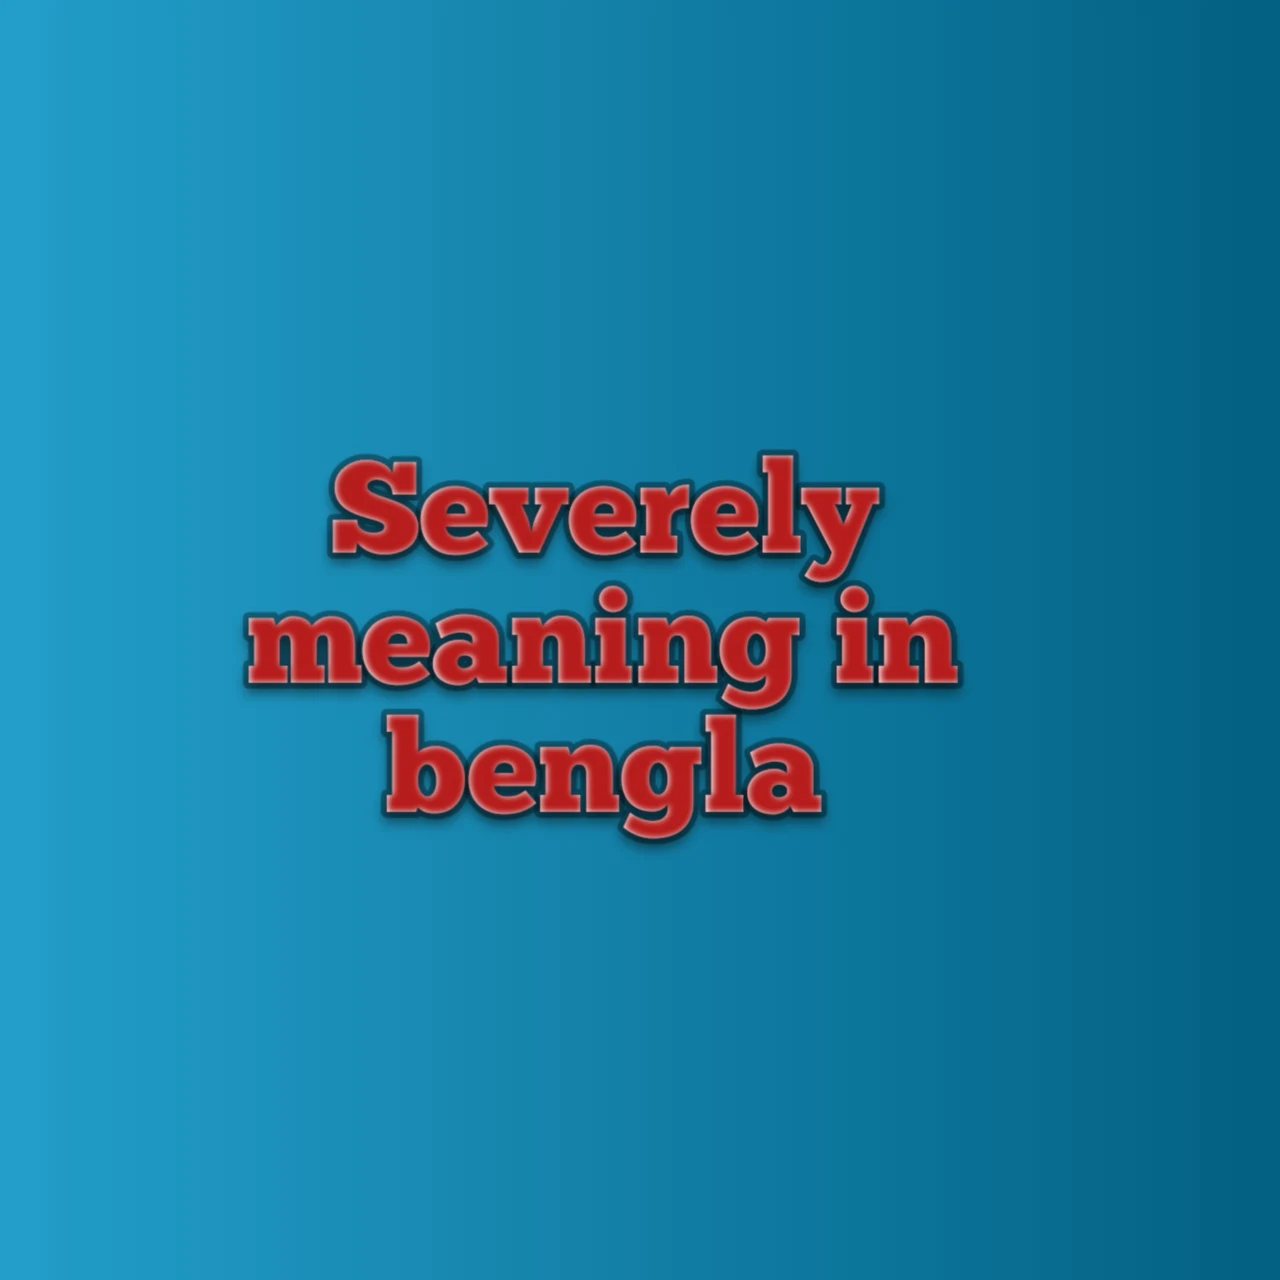 severely meaning in bengali, severely meaning